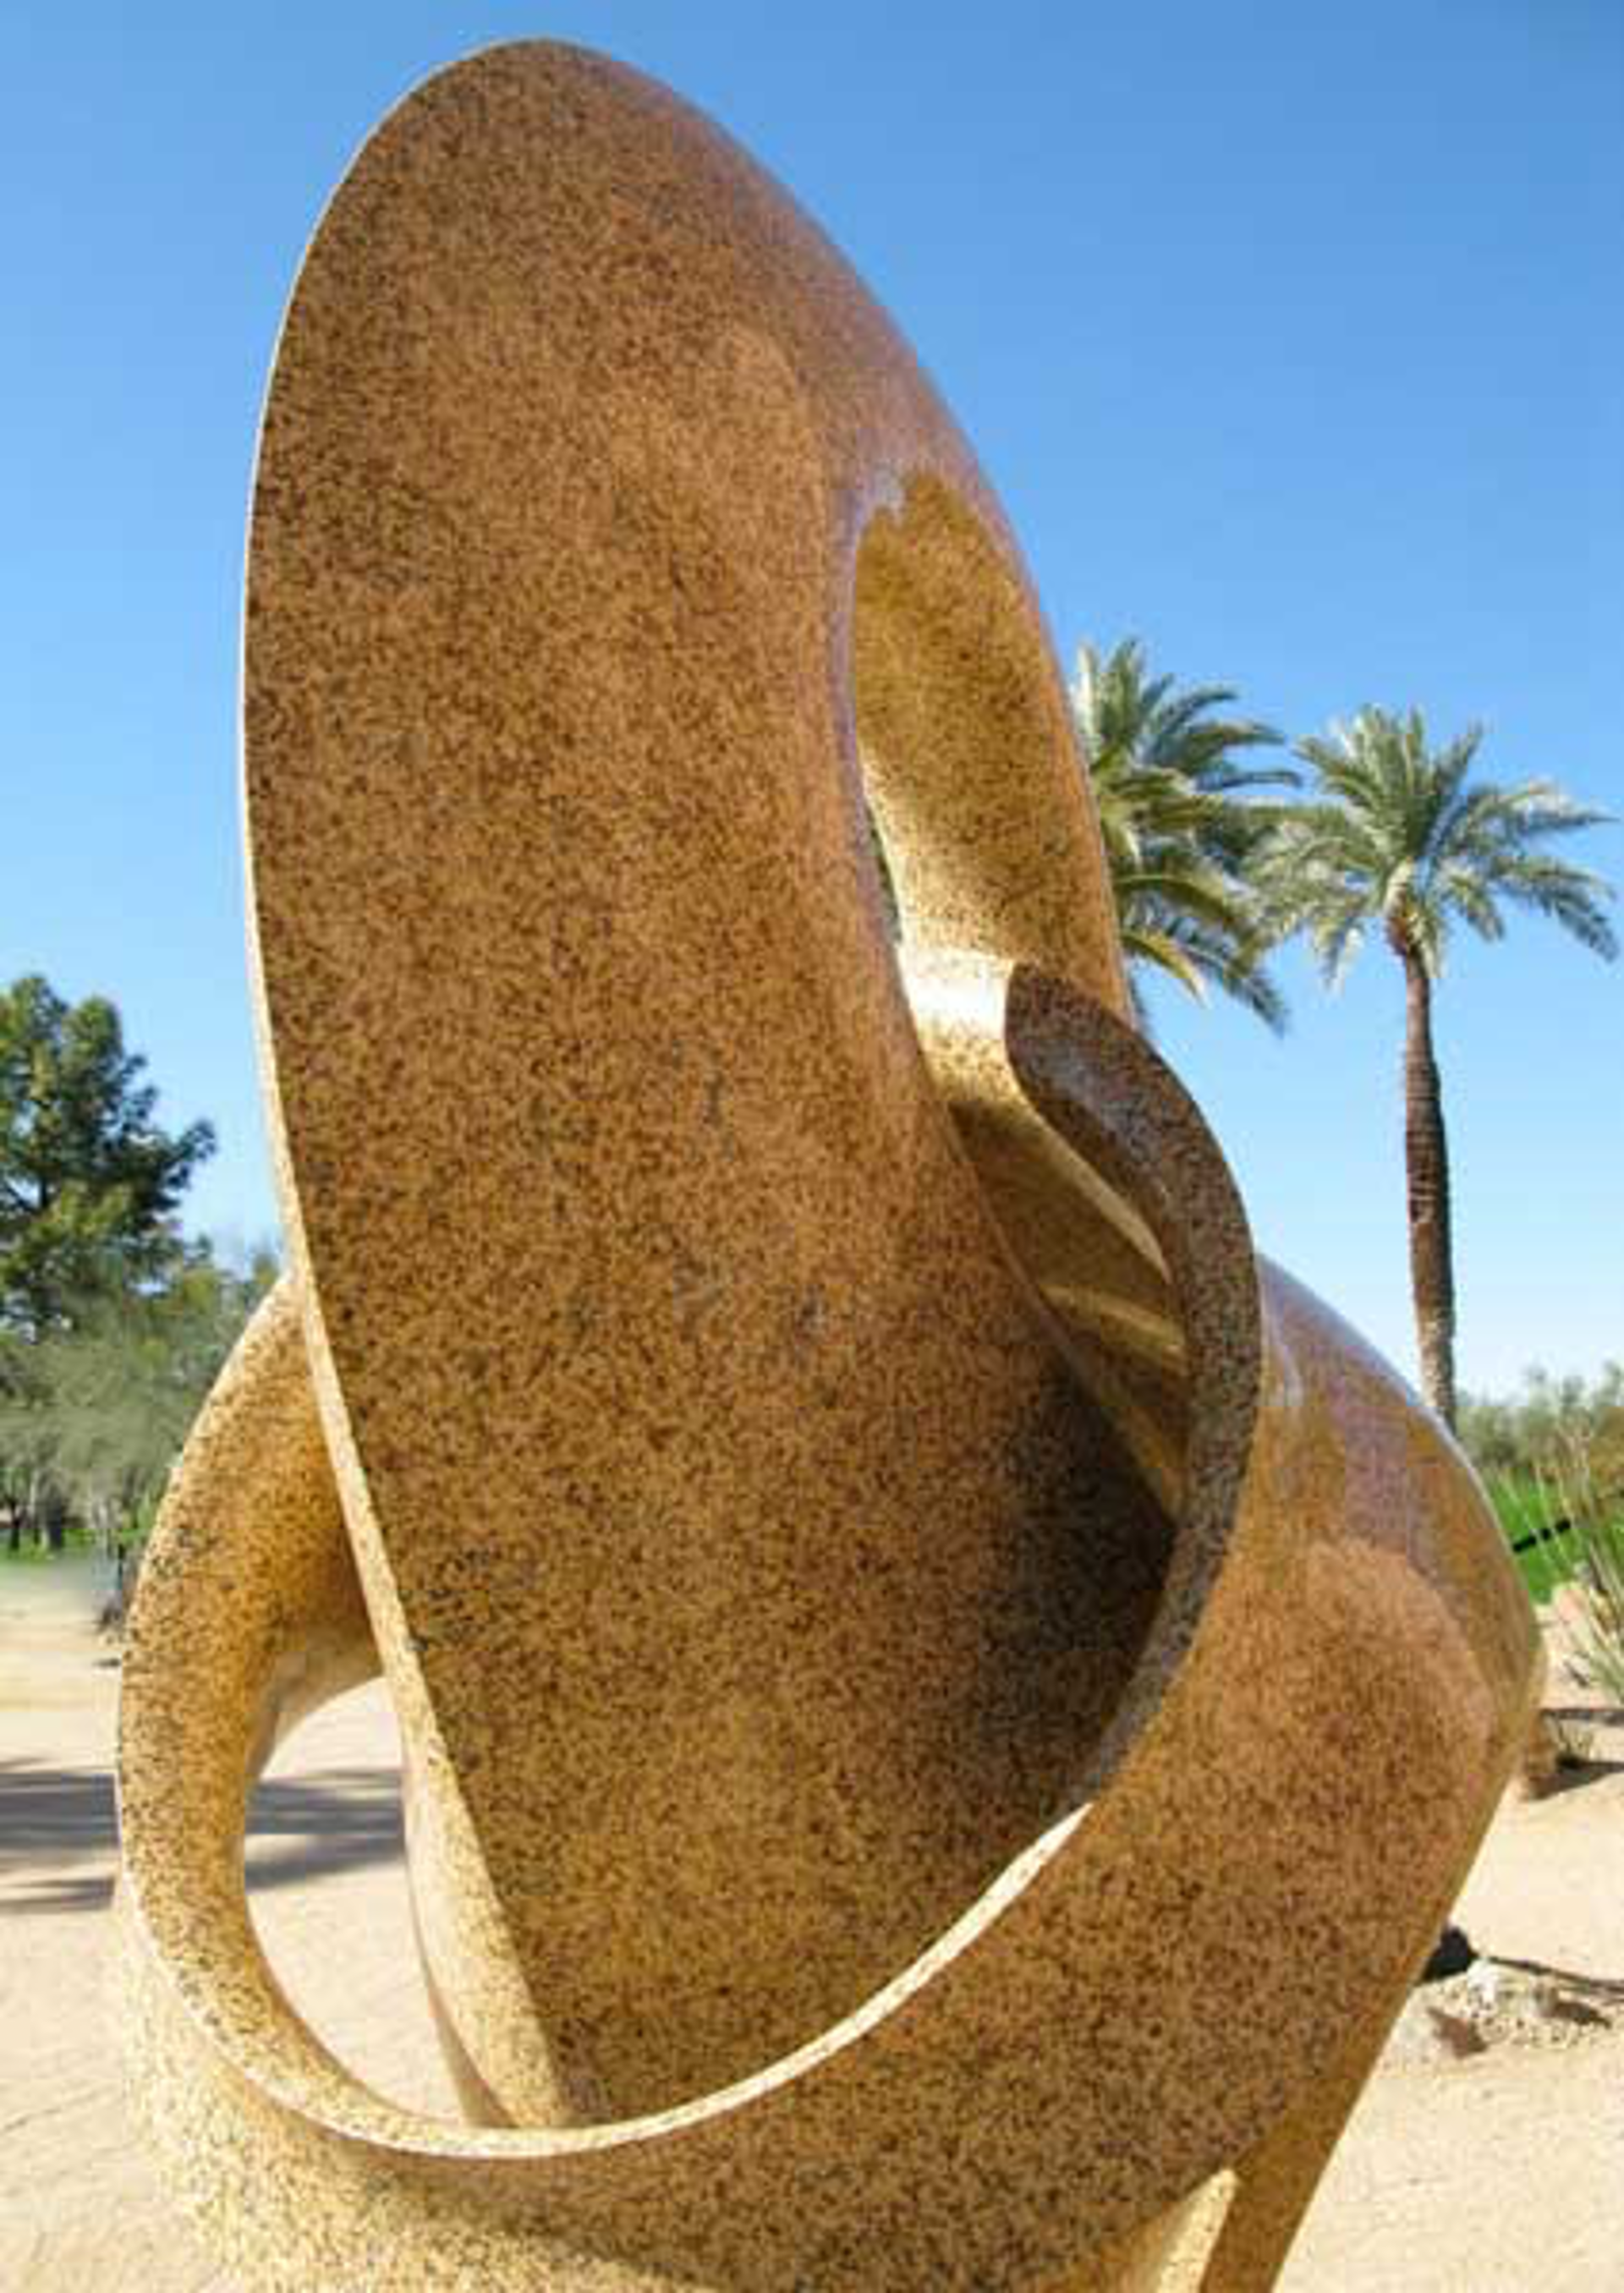 Realm of Passion (large Granite) by Khang Pham-New